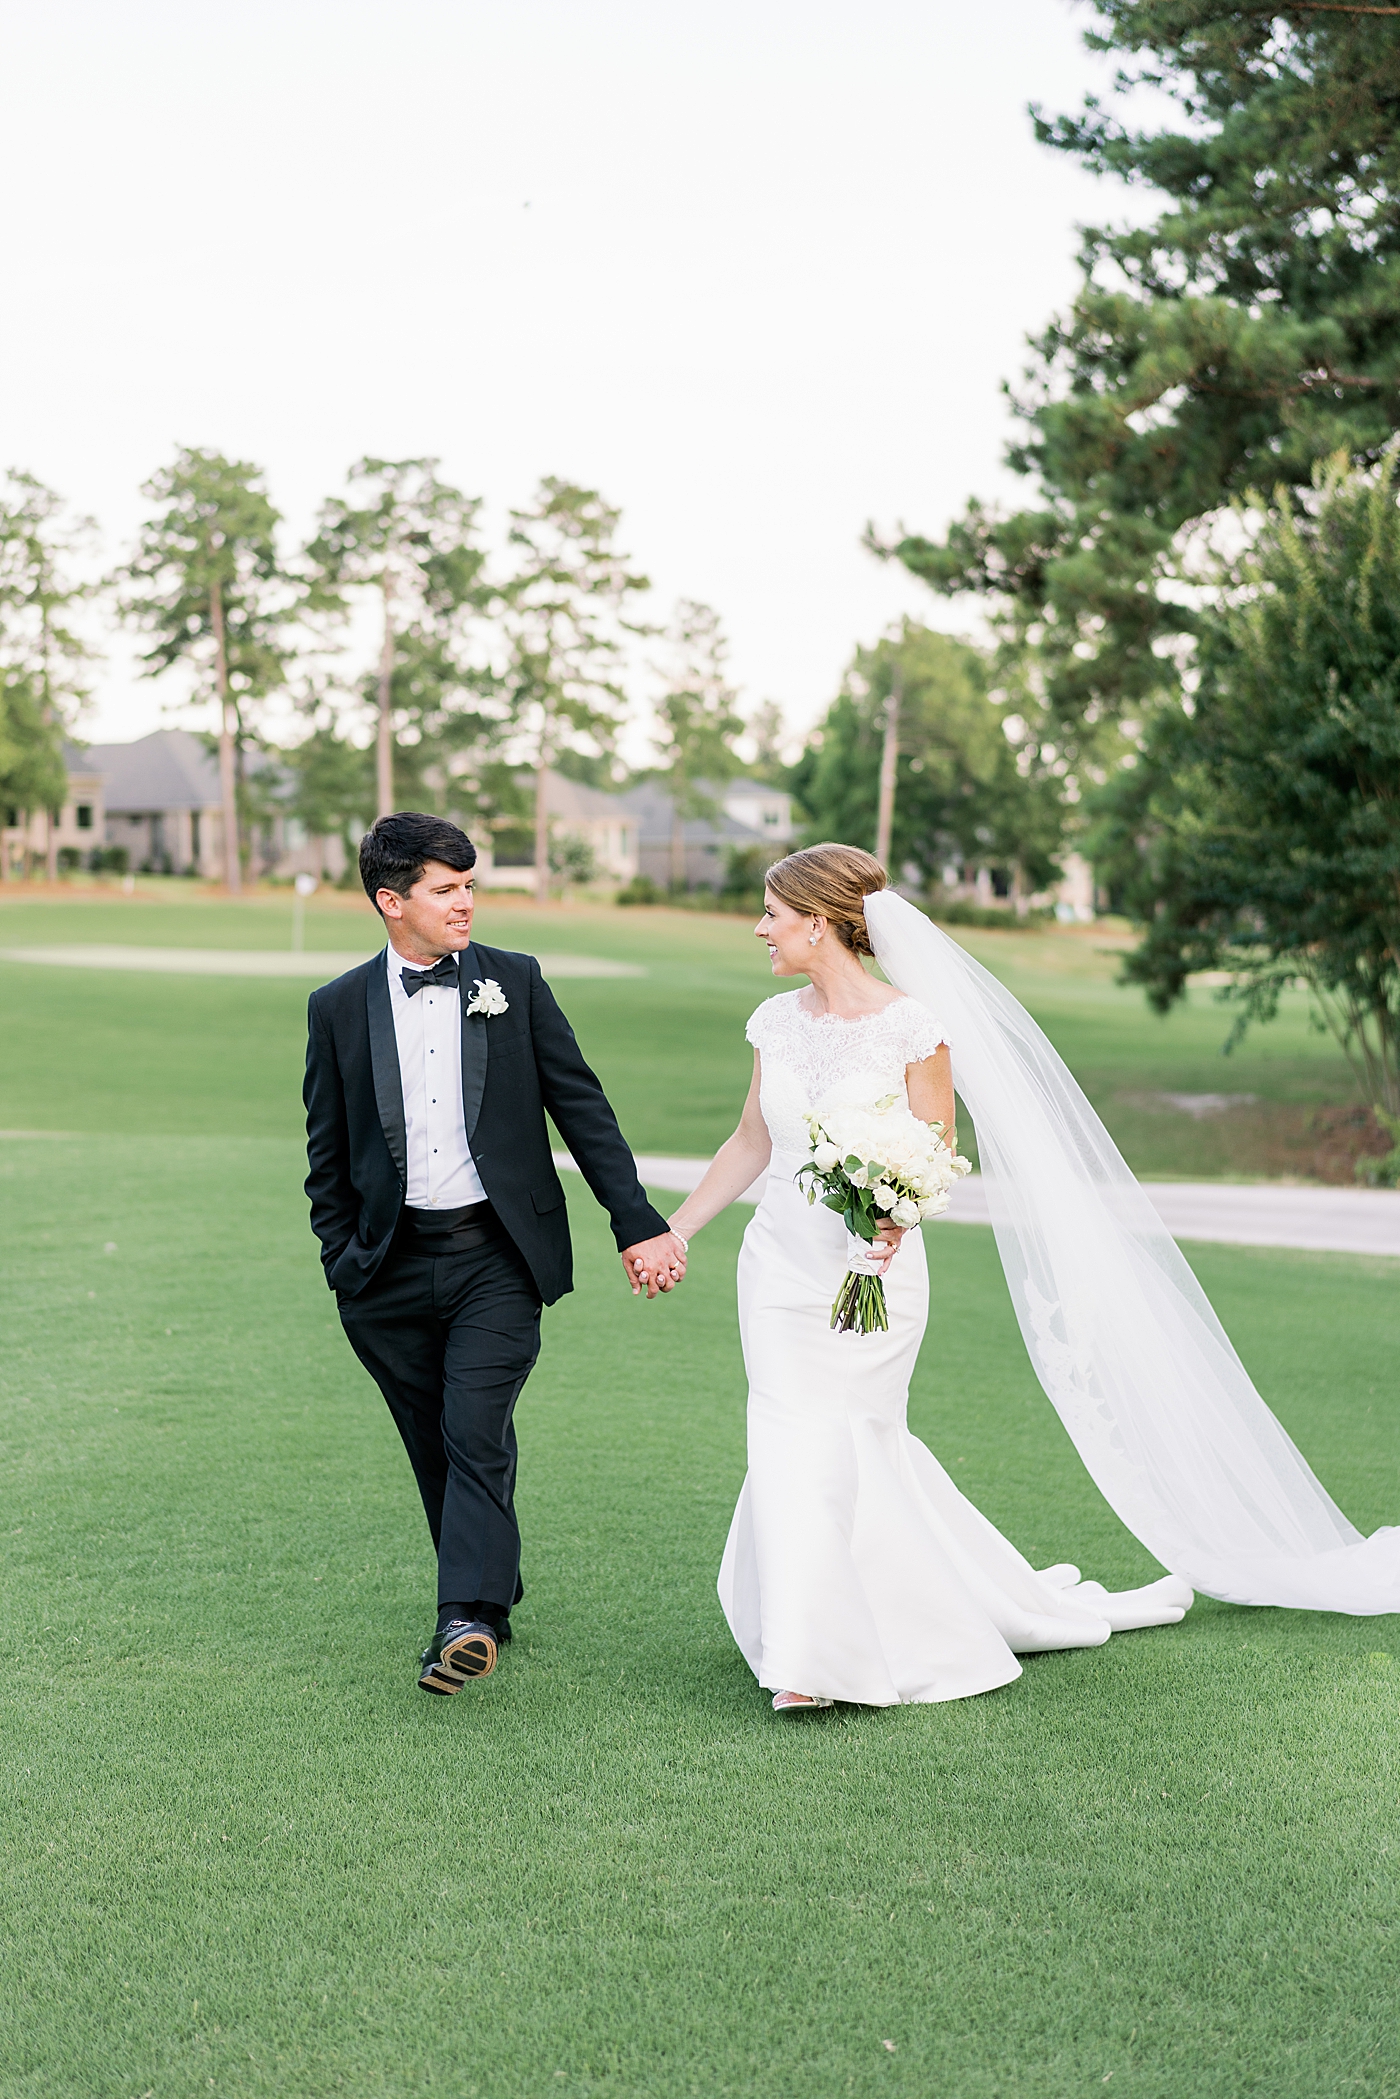 Bride and groom walking to their reception after their Simple Southern Country Club Wedding | Image by Annie Laura Photo